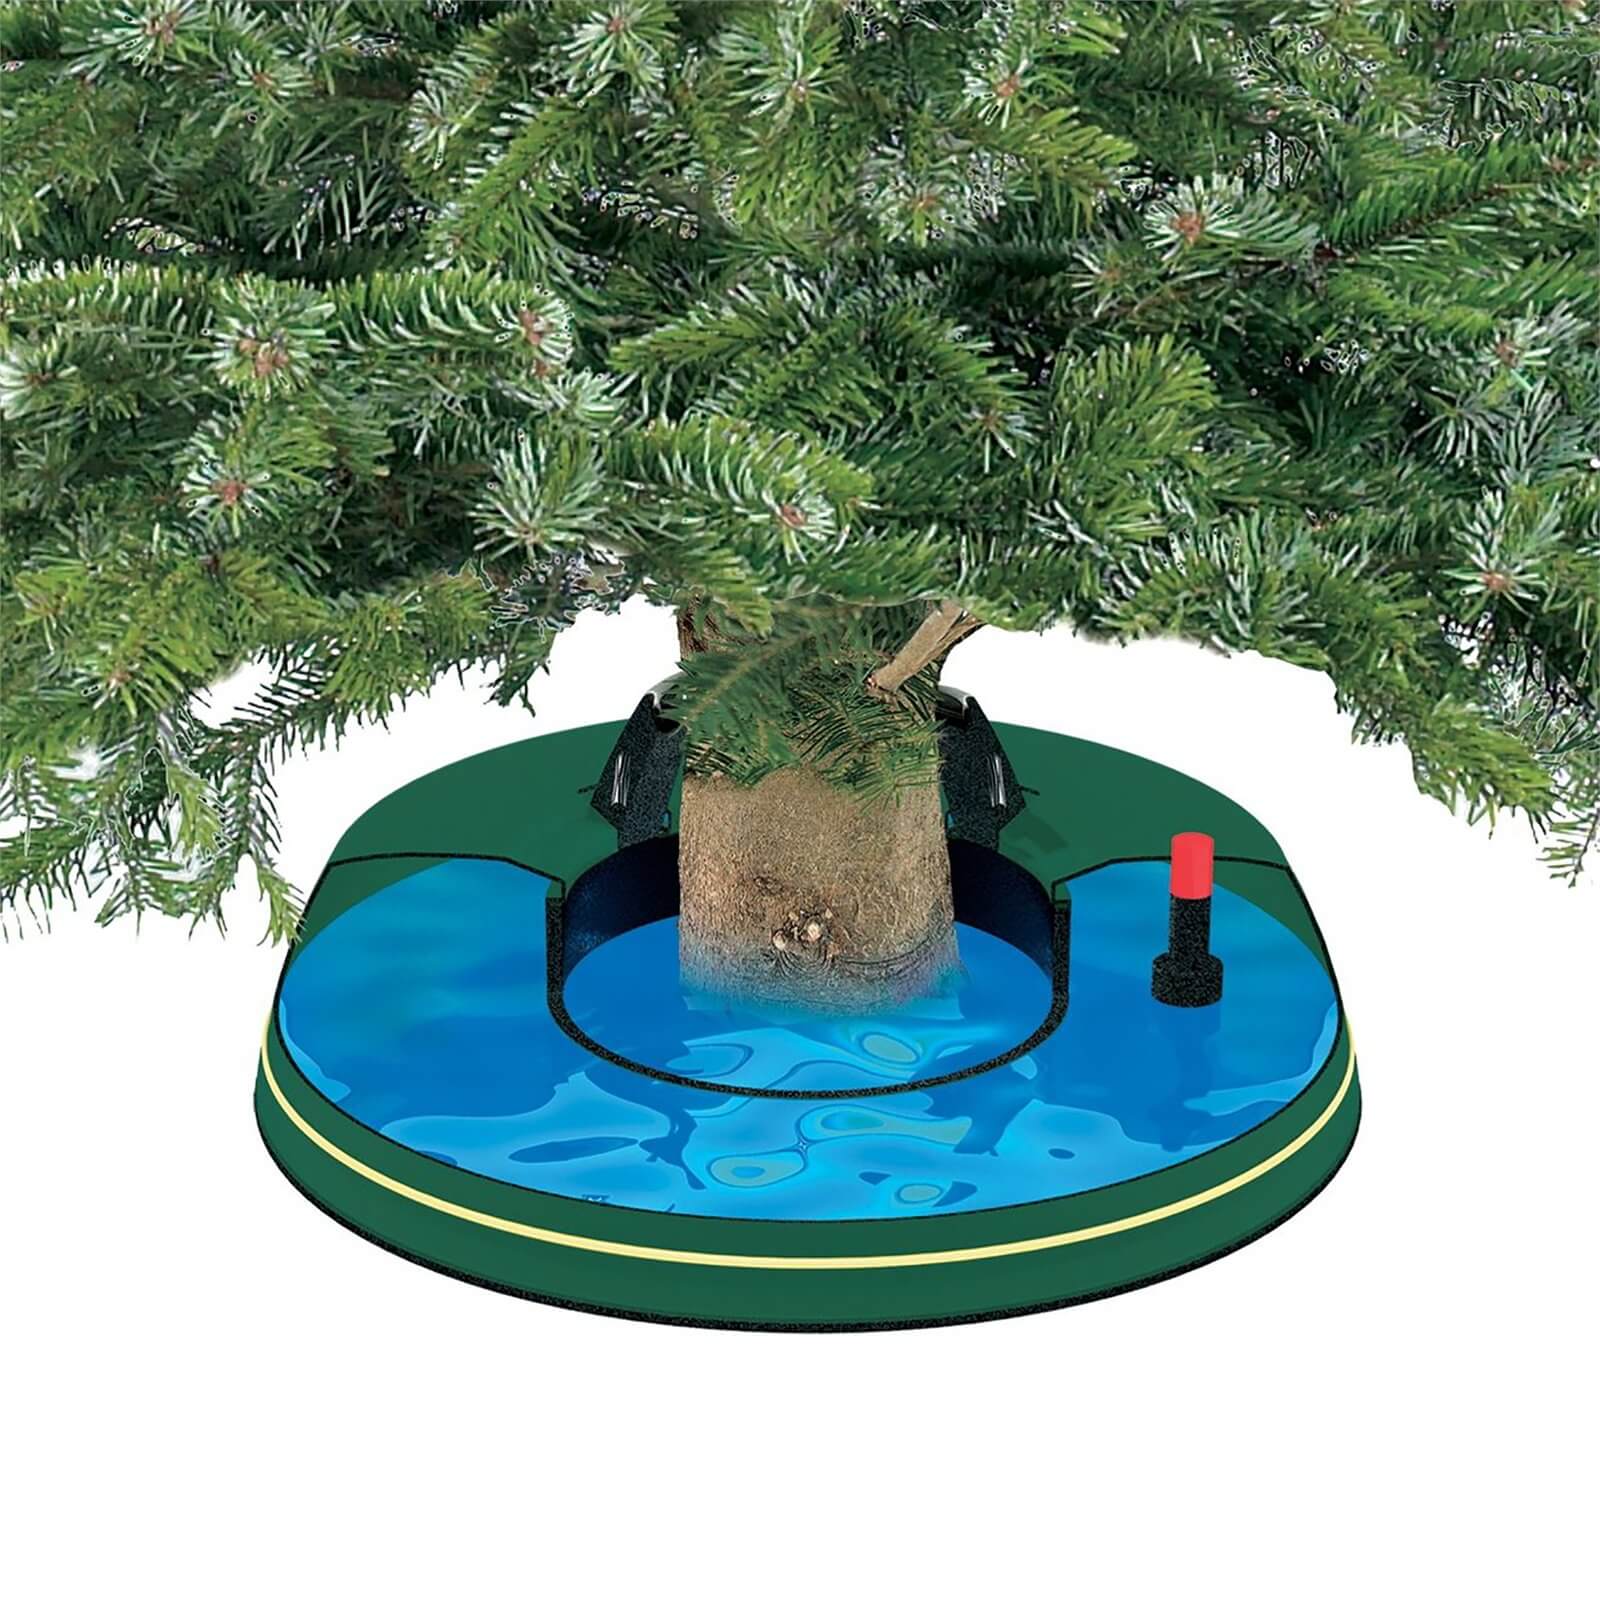 Krinner Classic Standard Christmas Tree Stand - 13 Inch